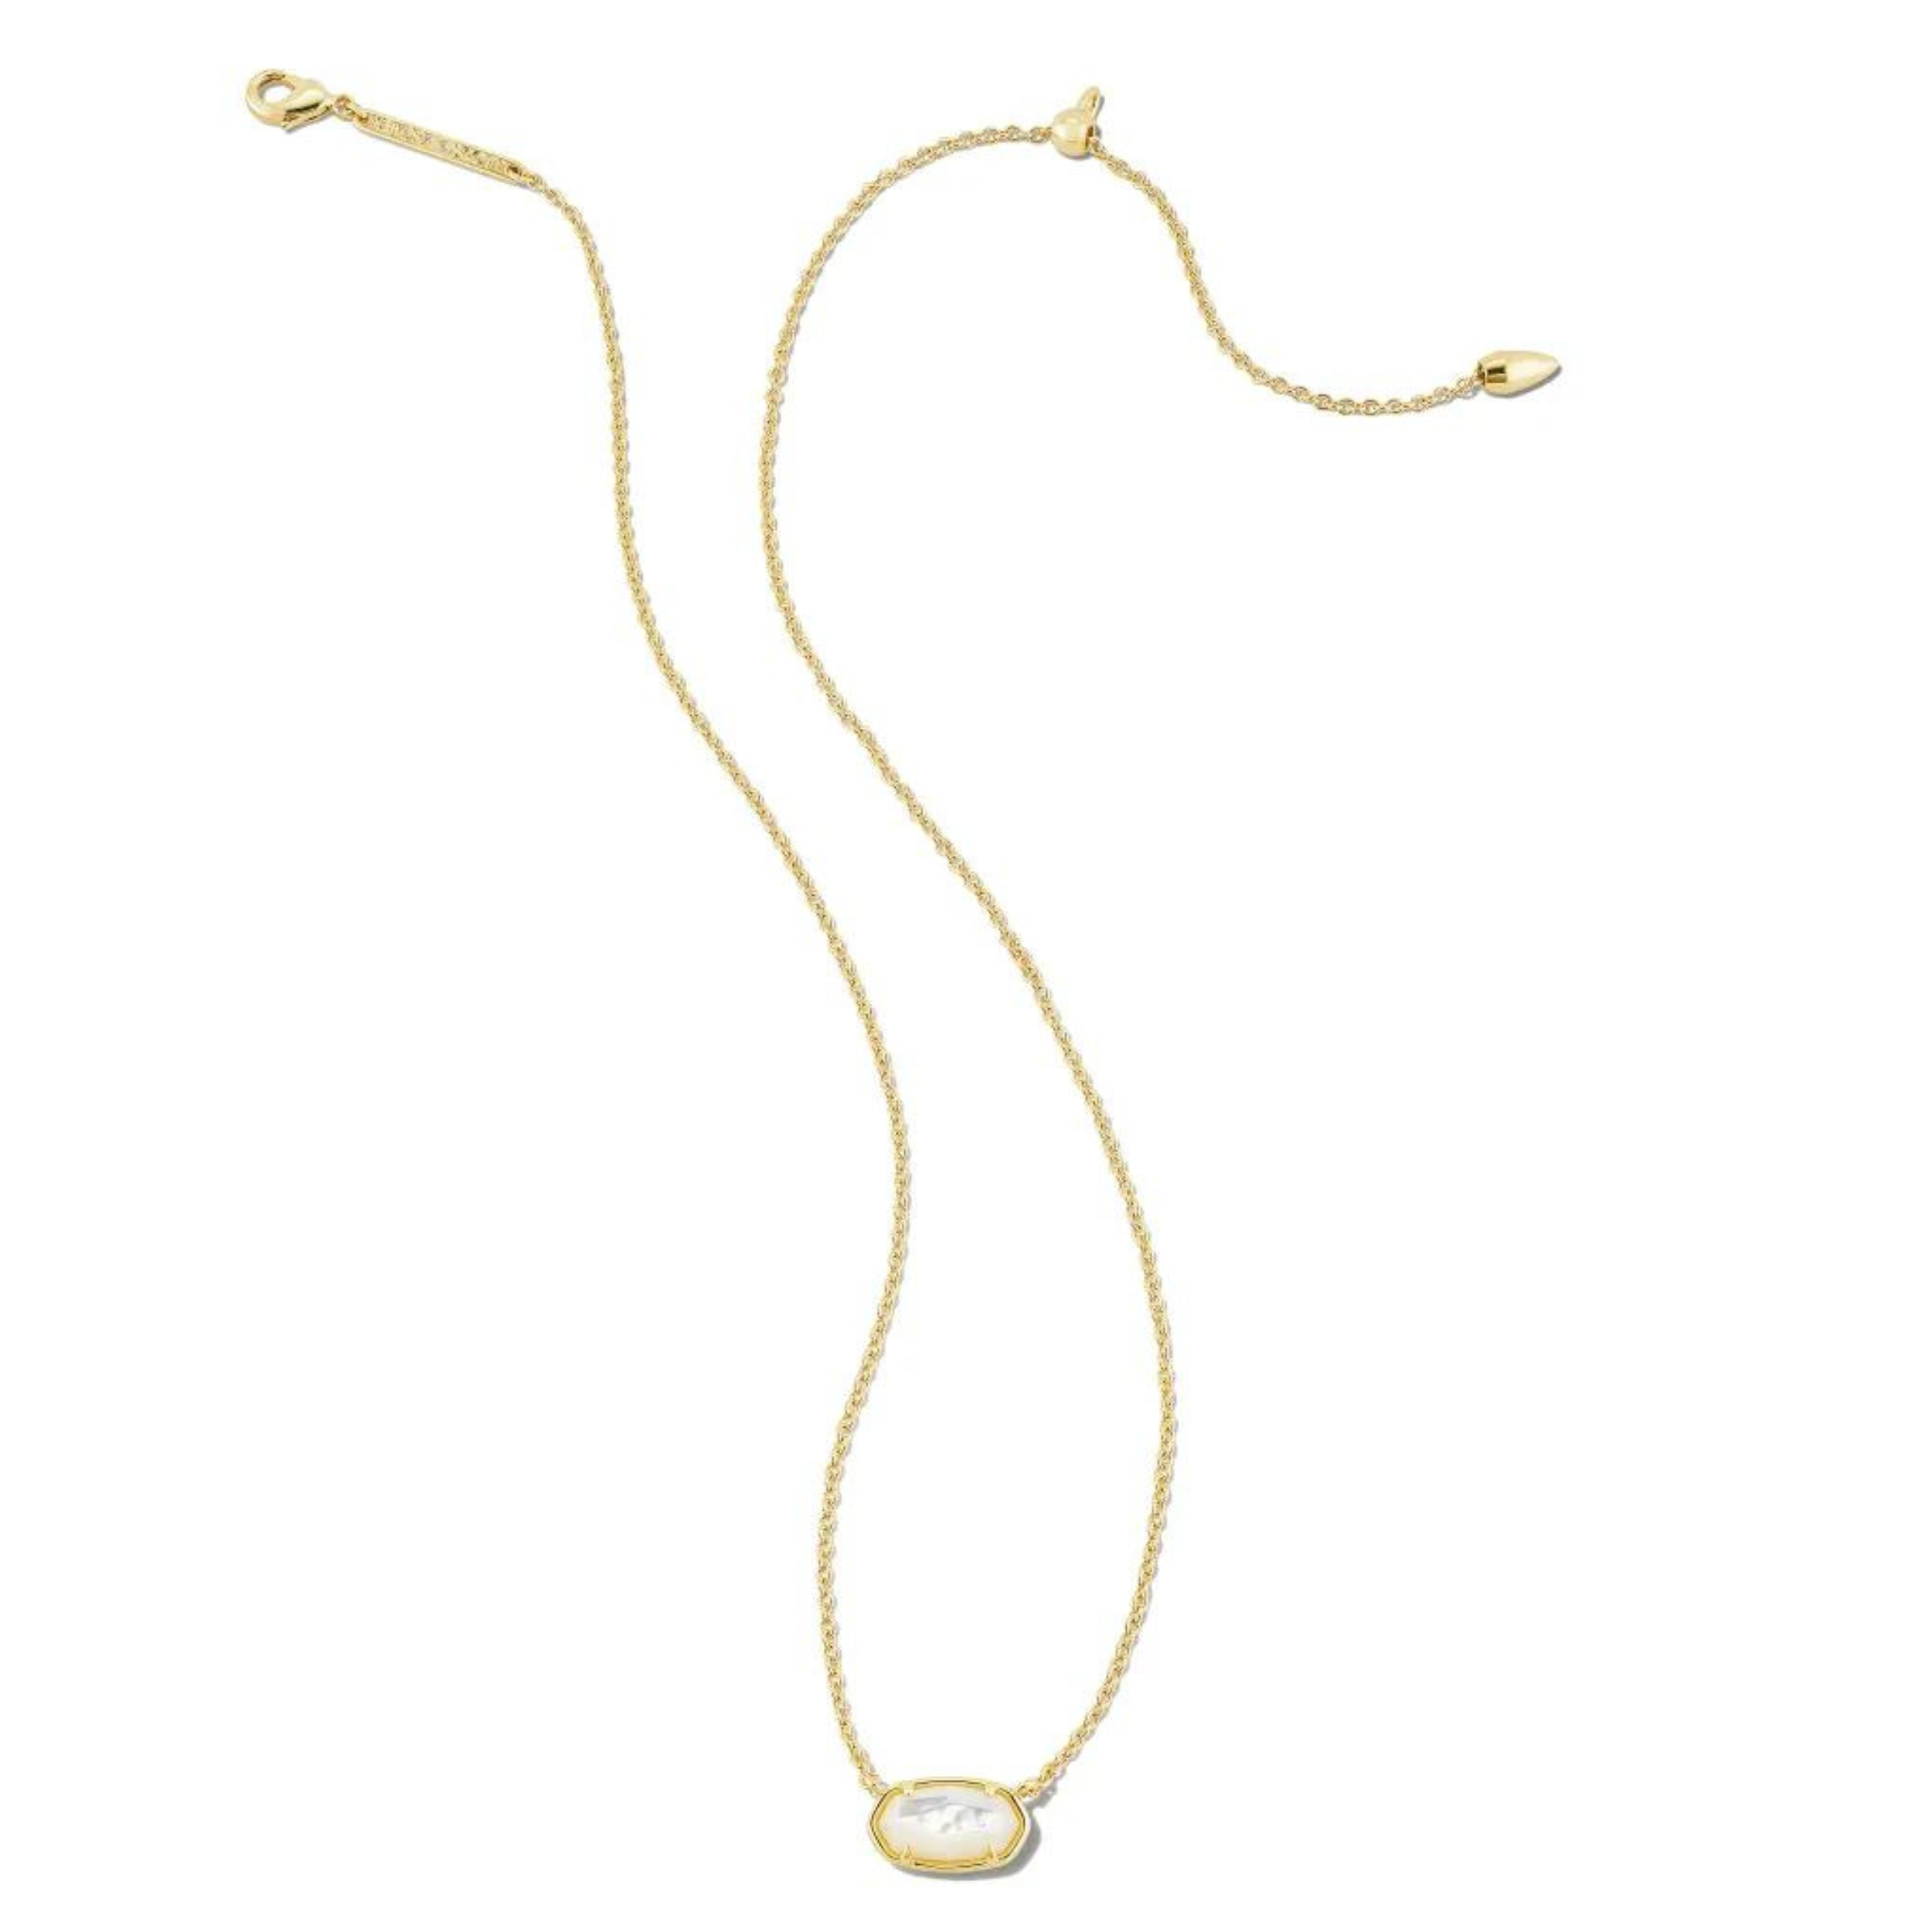 Kendra Scott | Grayson Gold Pendant Necklace in Ivory Mother-of-Pearl - Giddy Up Glamour Boutique